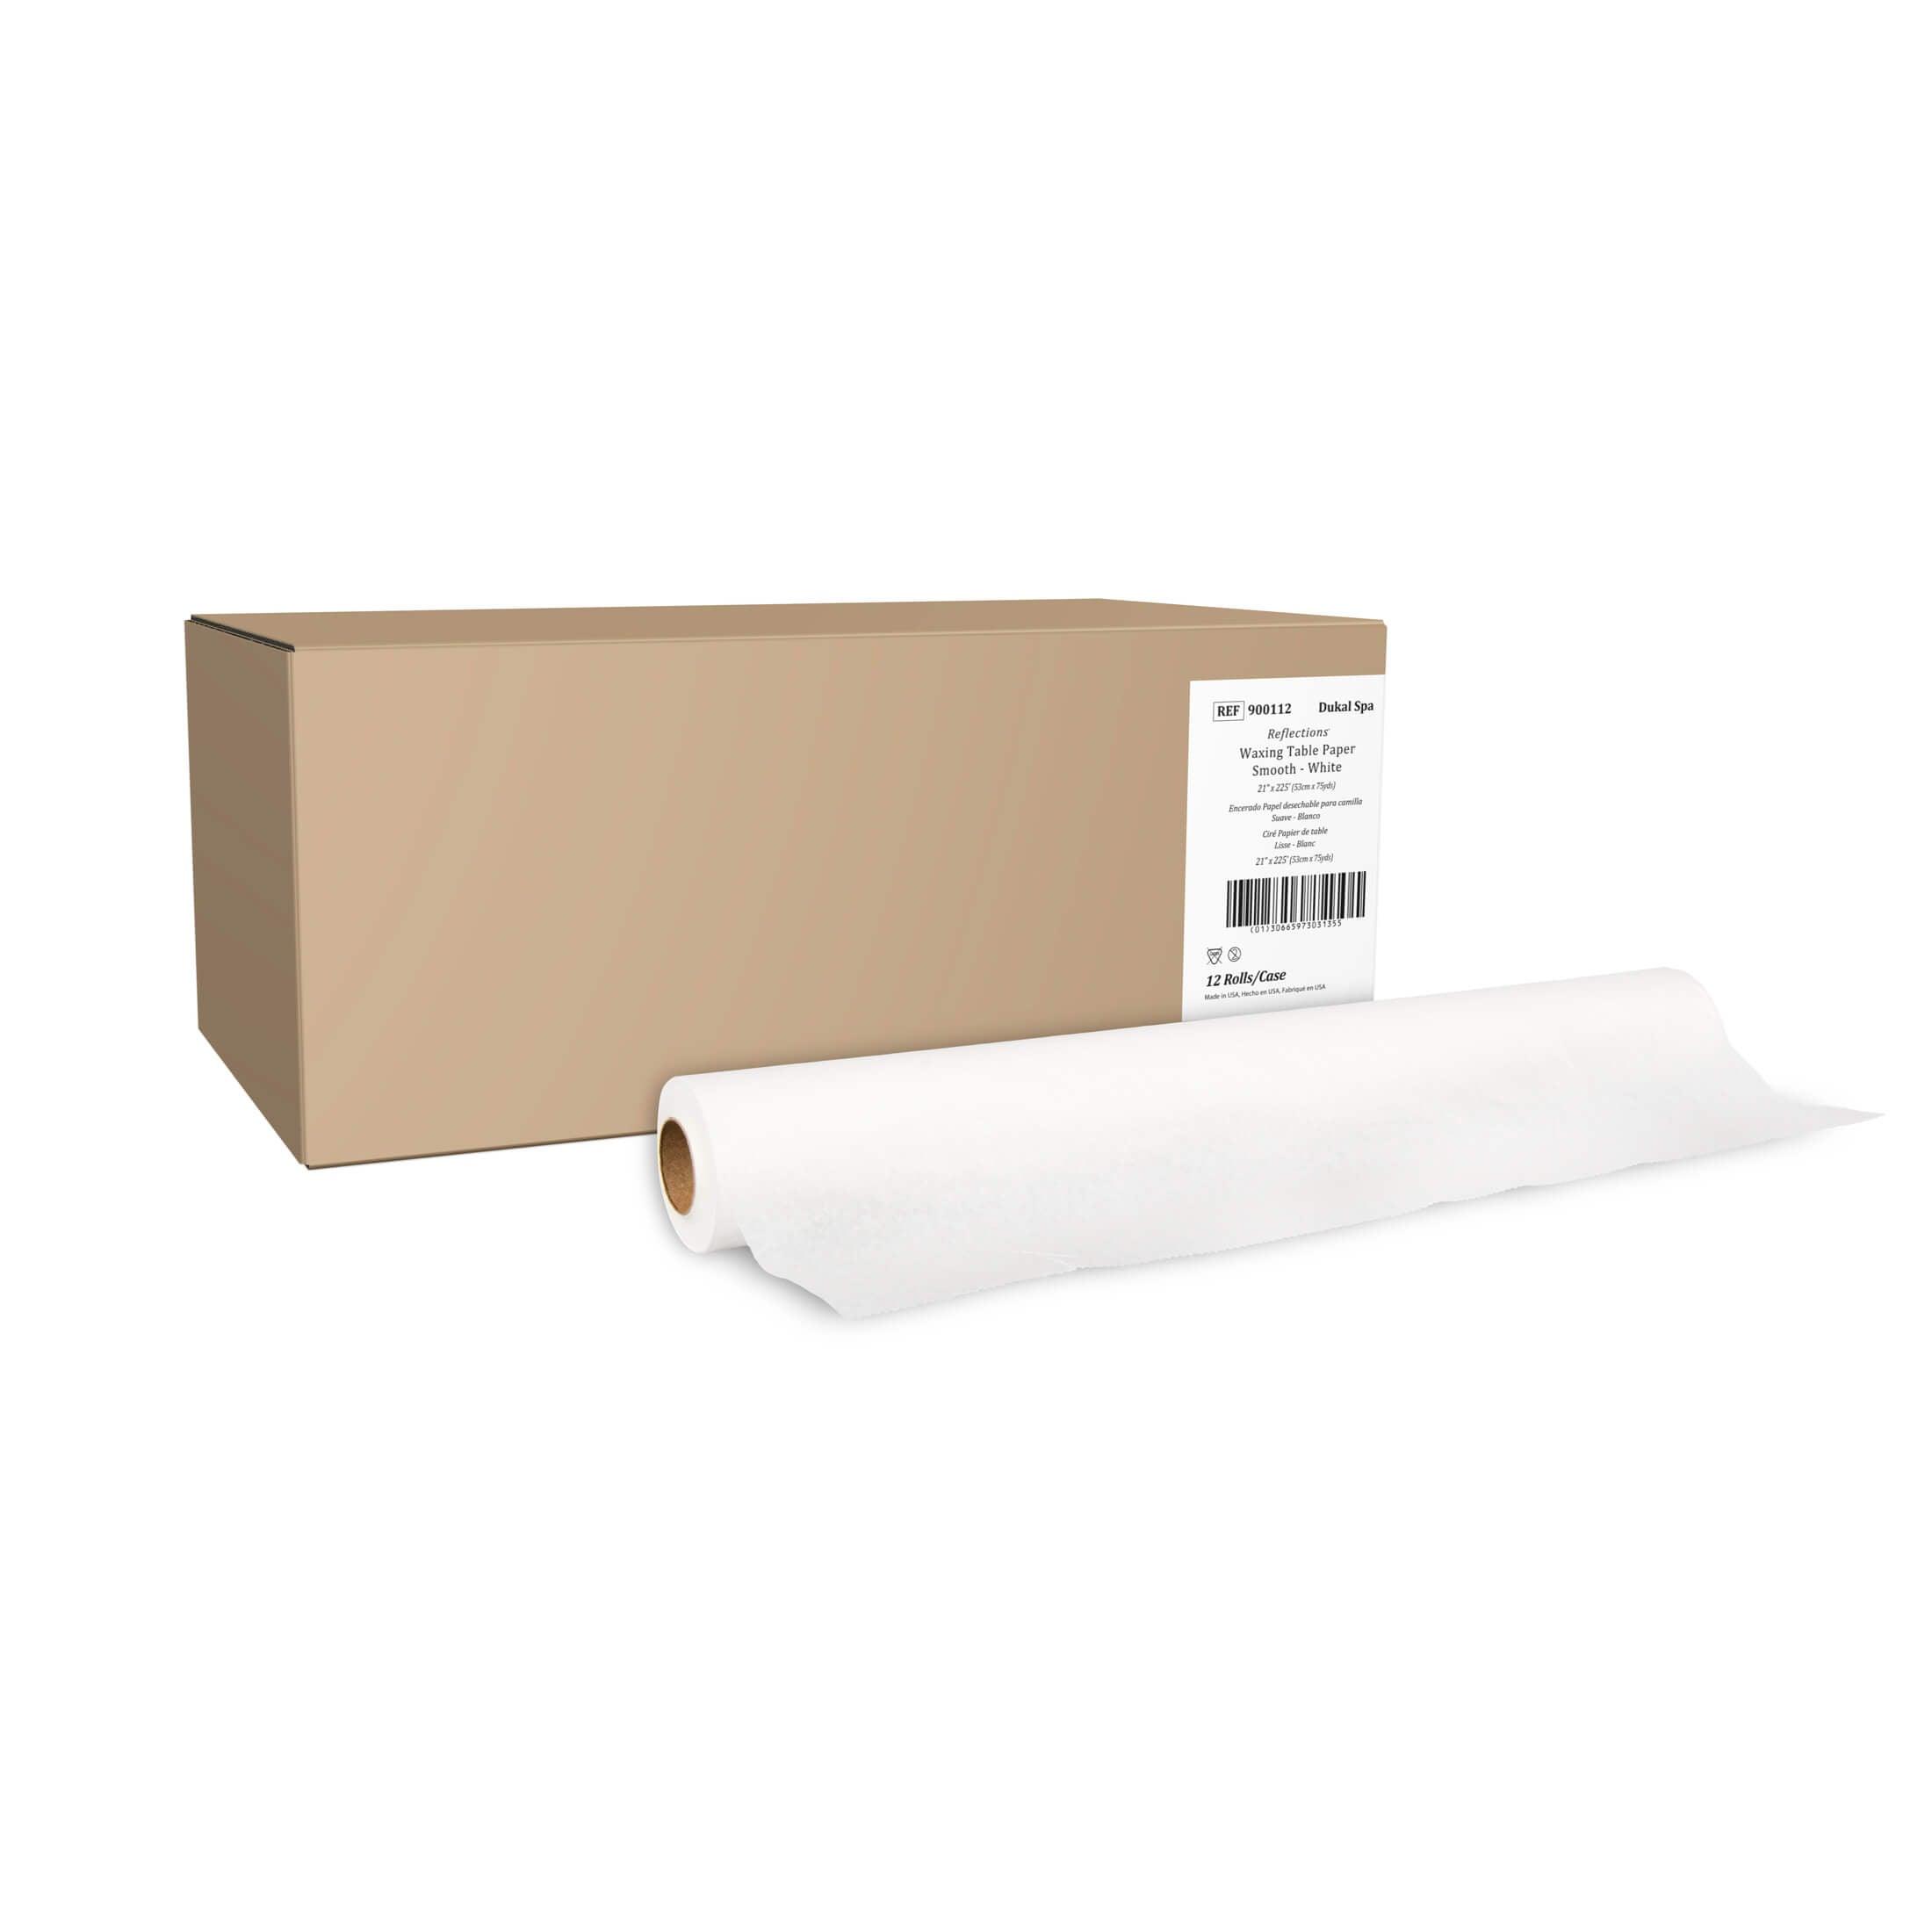 Dukal Waxing Table Paper Smooth 21” x 225' (Case of 12 Rolls)